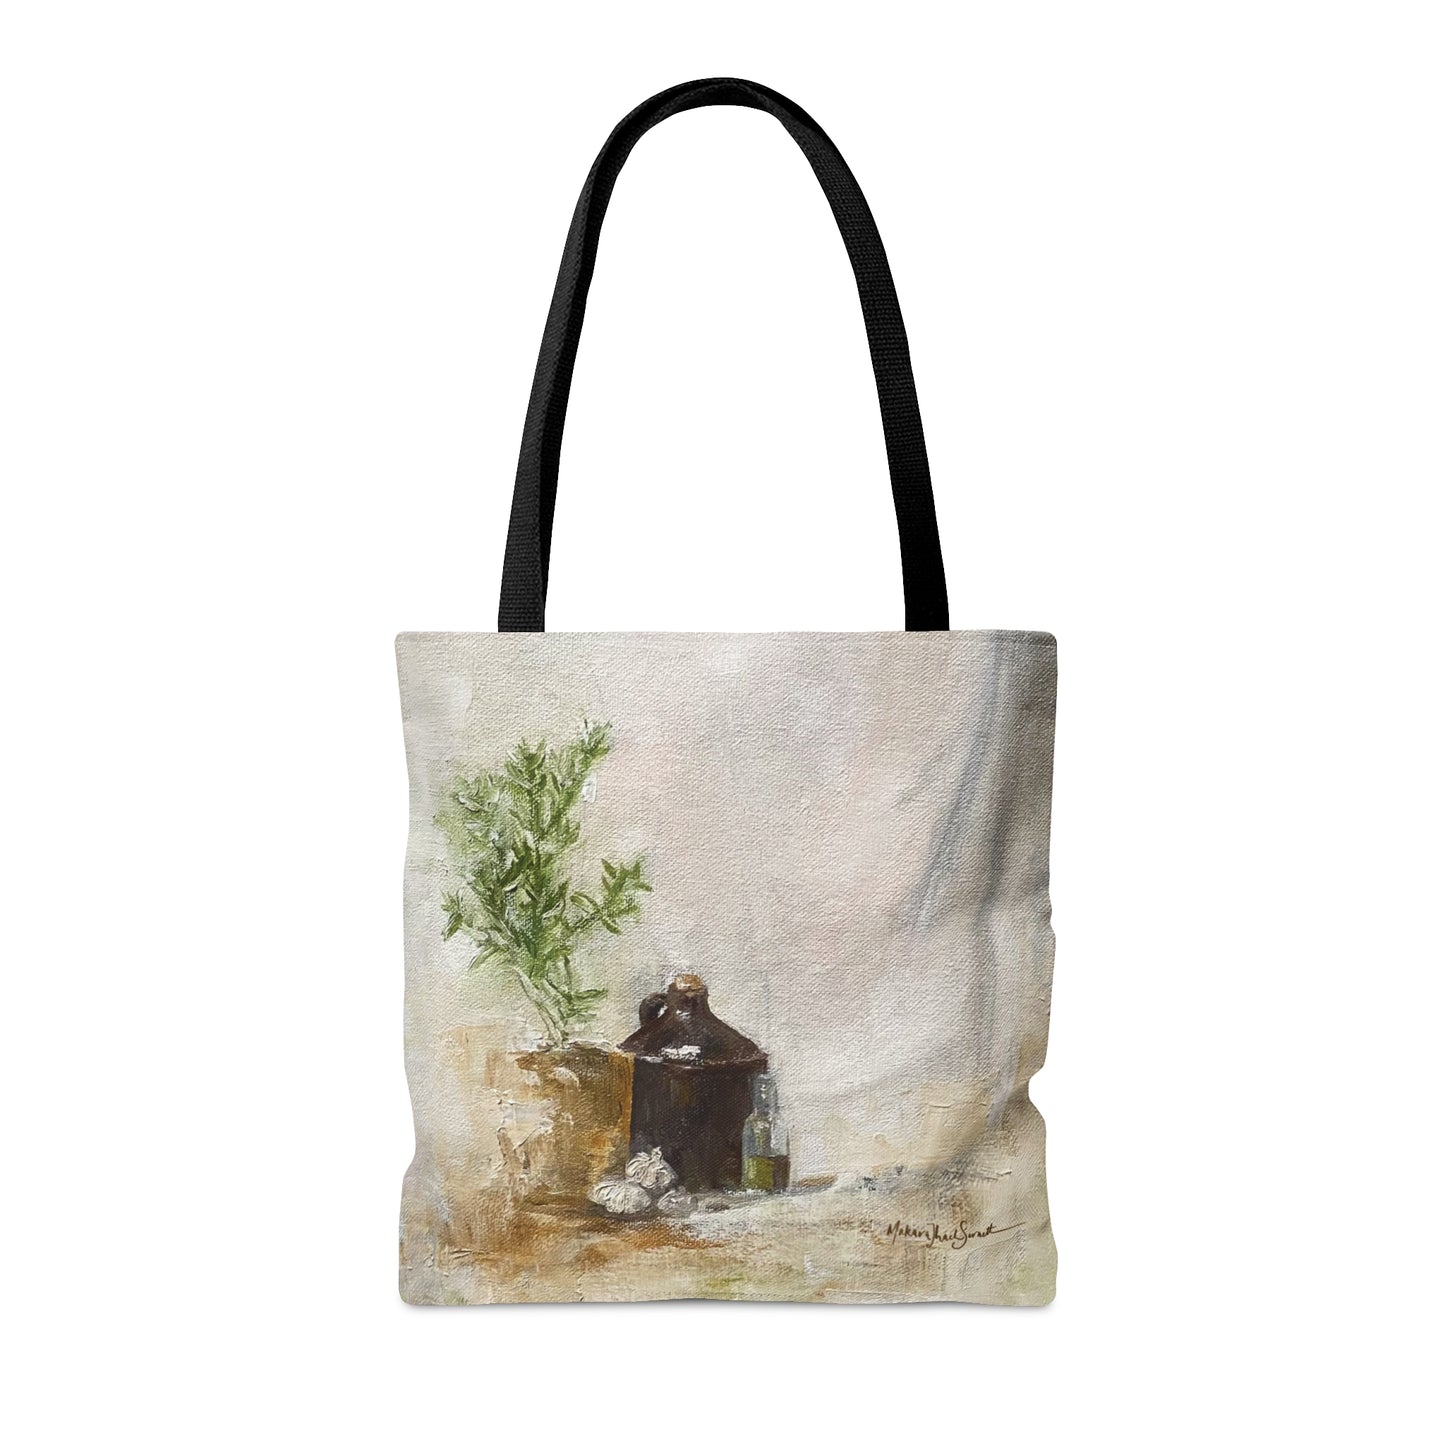 Olive You Tote Bag